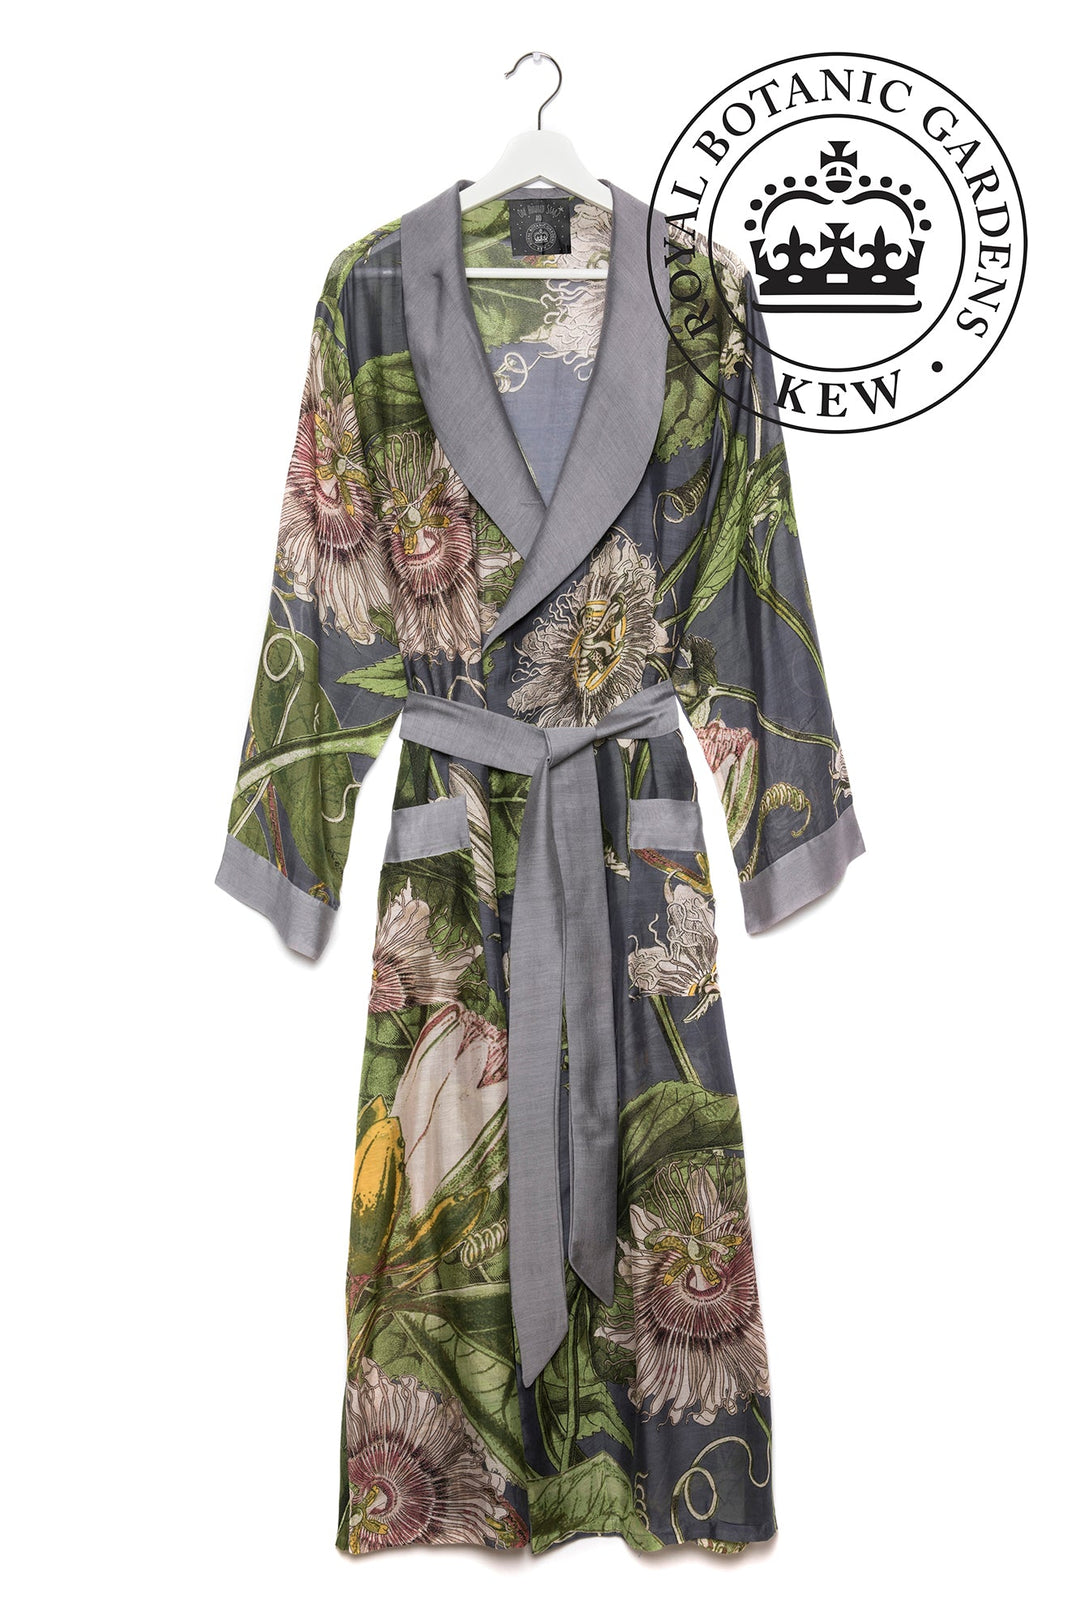 KEW Passion Flower Grey Gown- This gown is perfect as a luxurious house coat or for layering as a chic accessory to your favourite outfit.